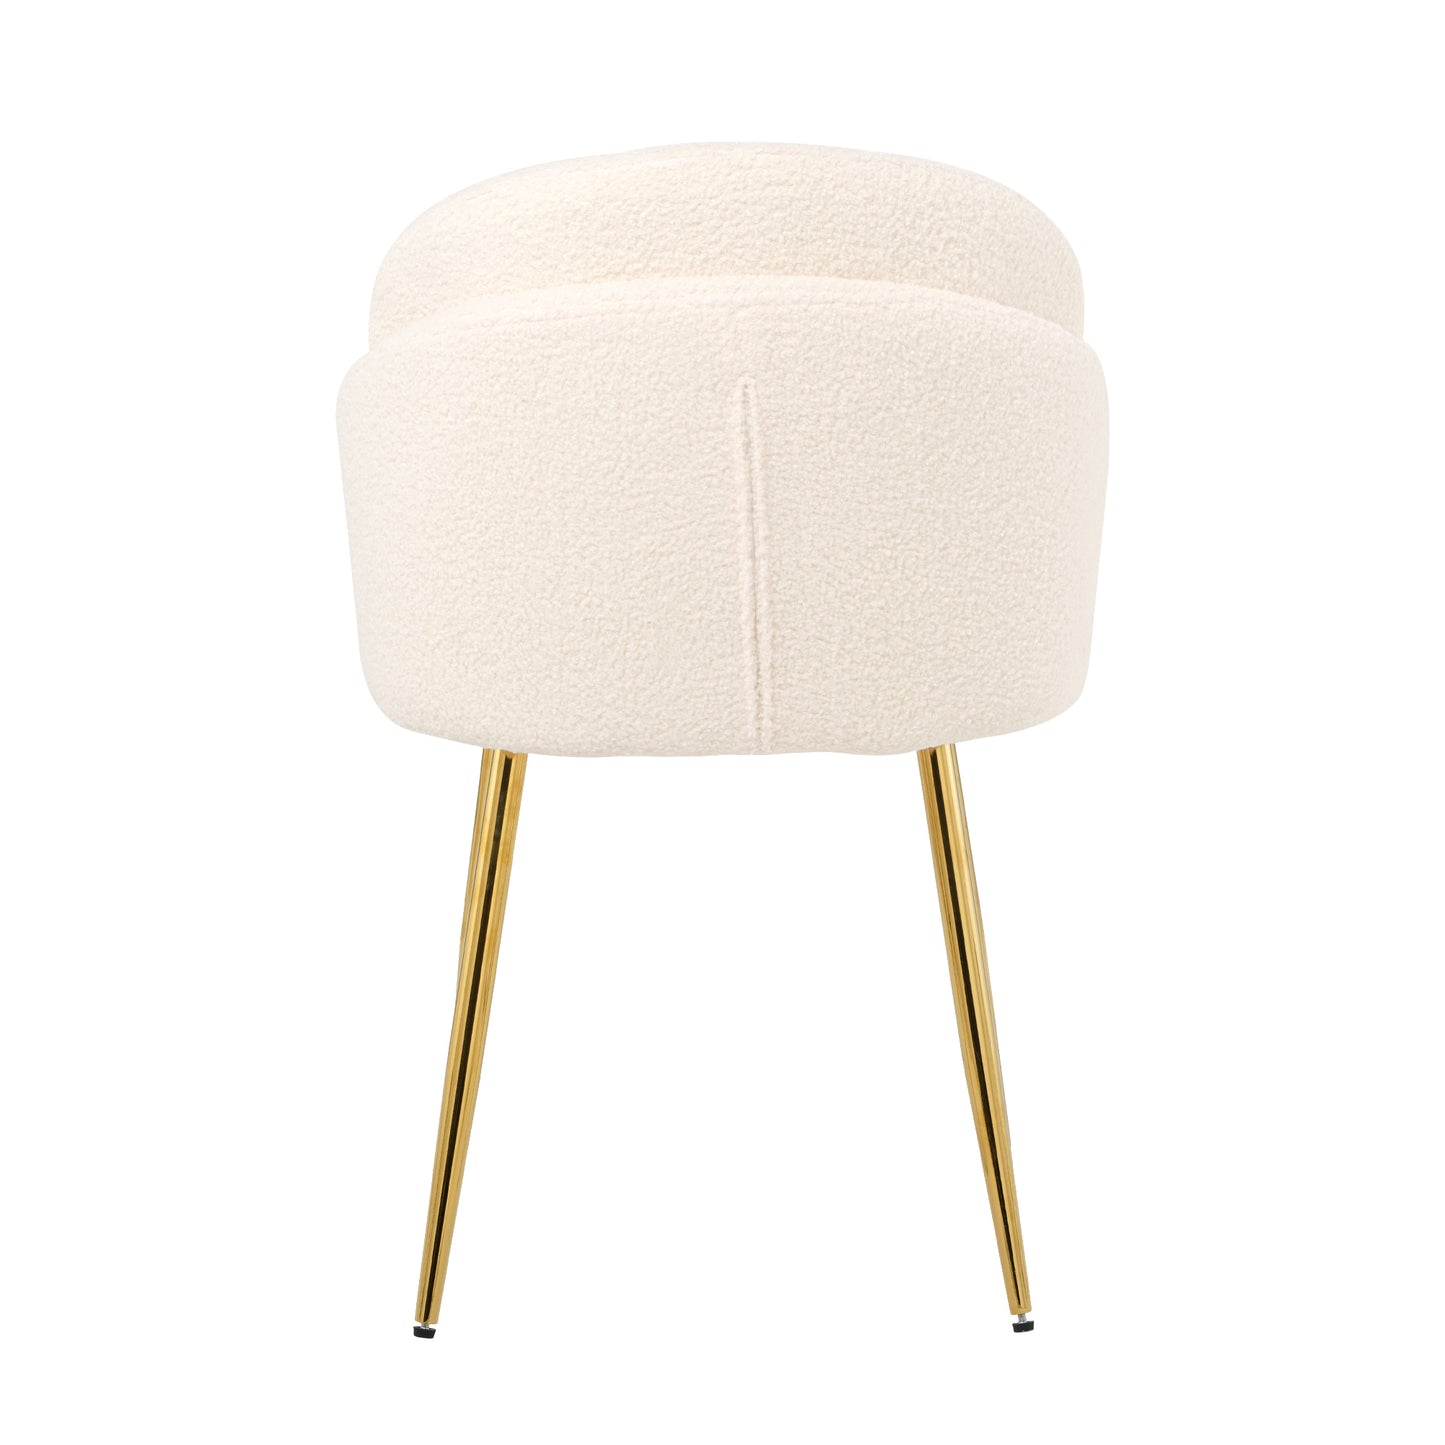 Modern simple teddy fleece dining chair Fabric Upholstered Chairs home bedroom stool back dressing chair gold metal legs(set of 2) - Enova Luxe Home Store